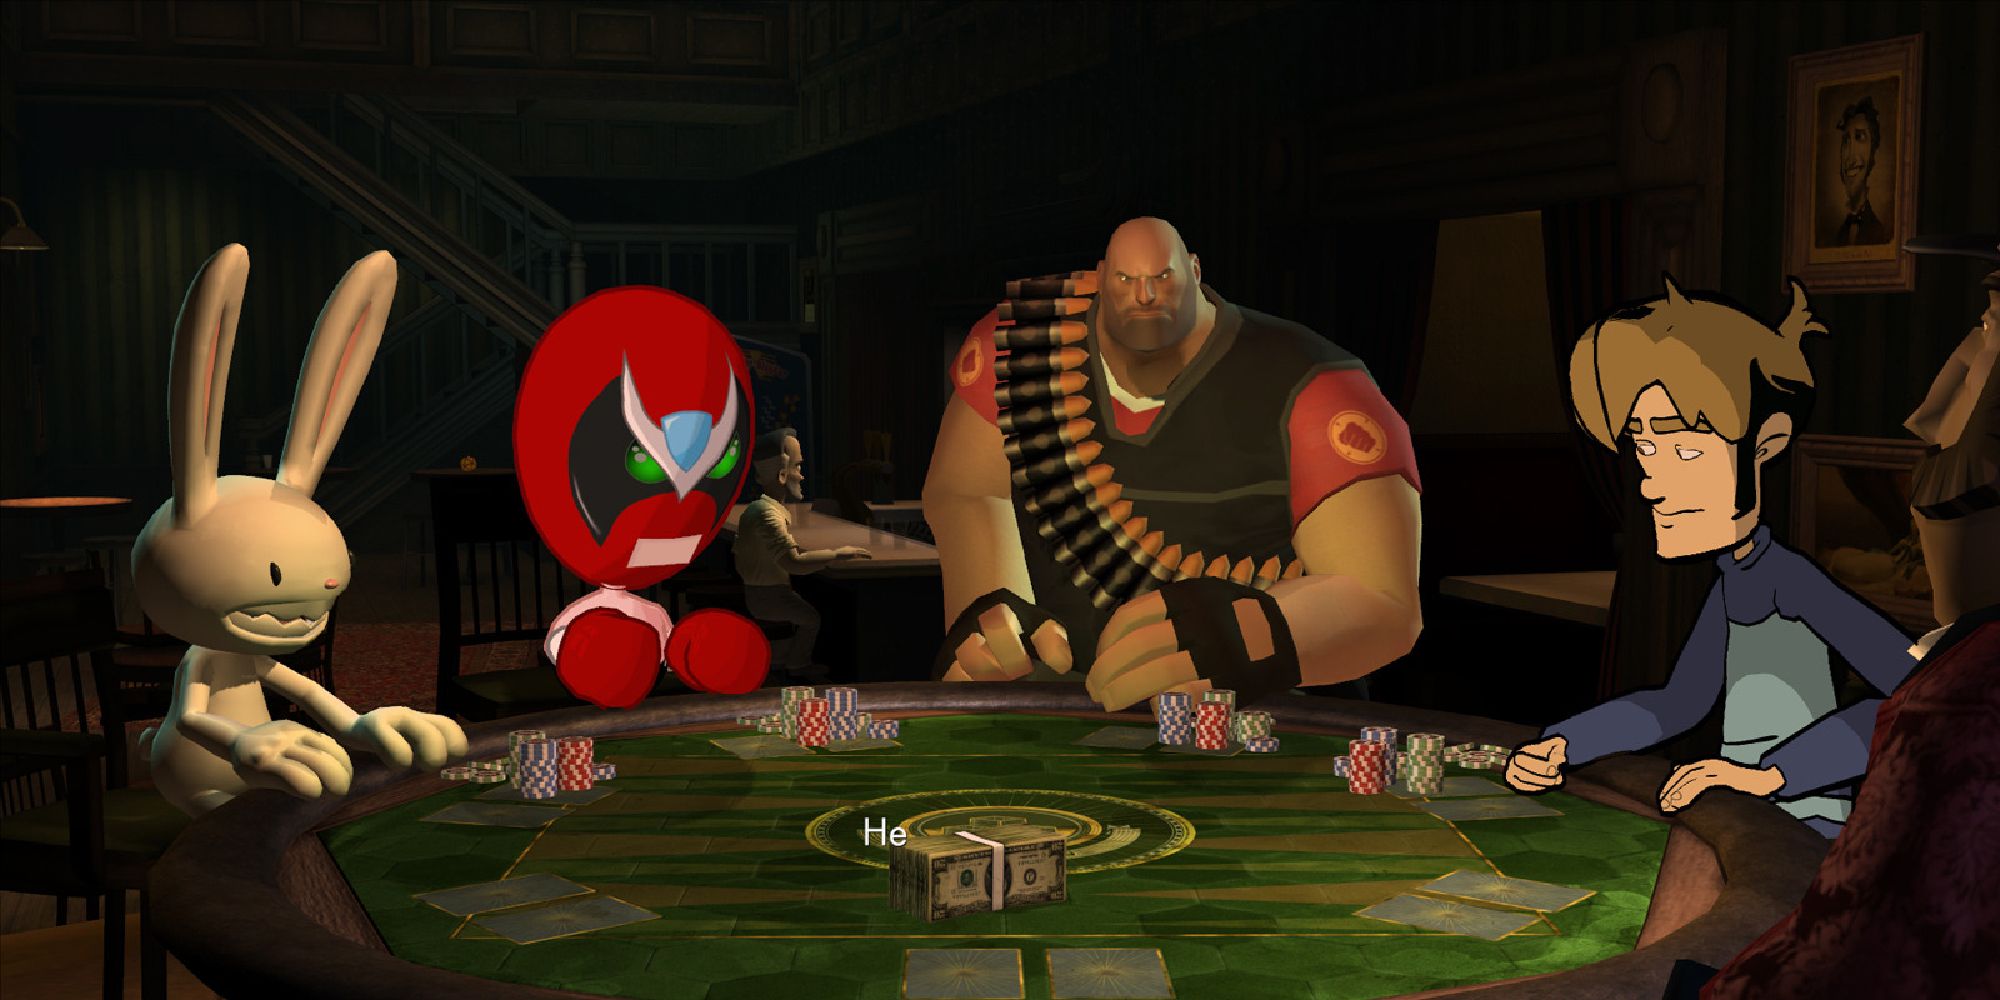 Four characters from very different games sharing a game of poker. 